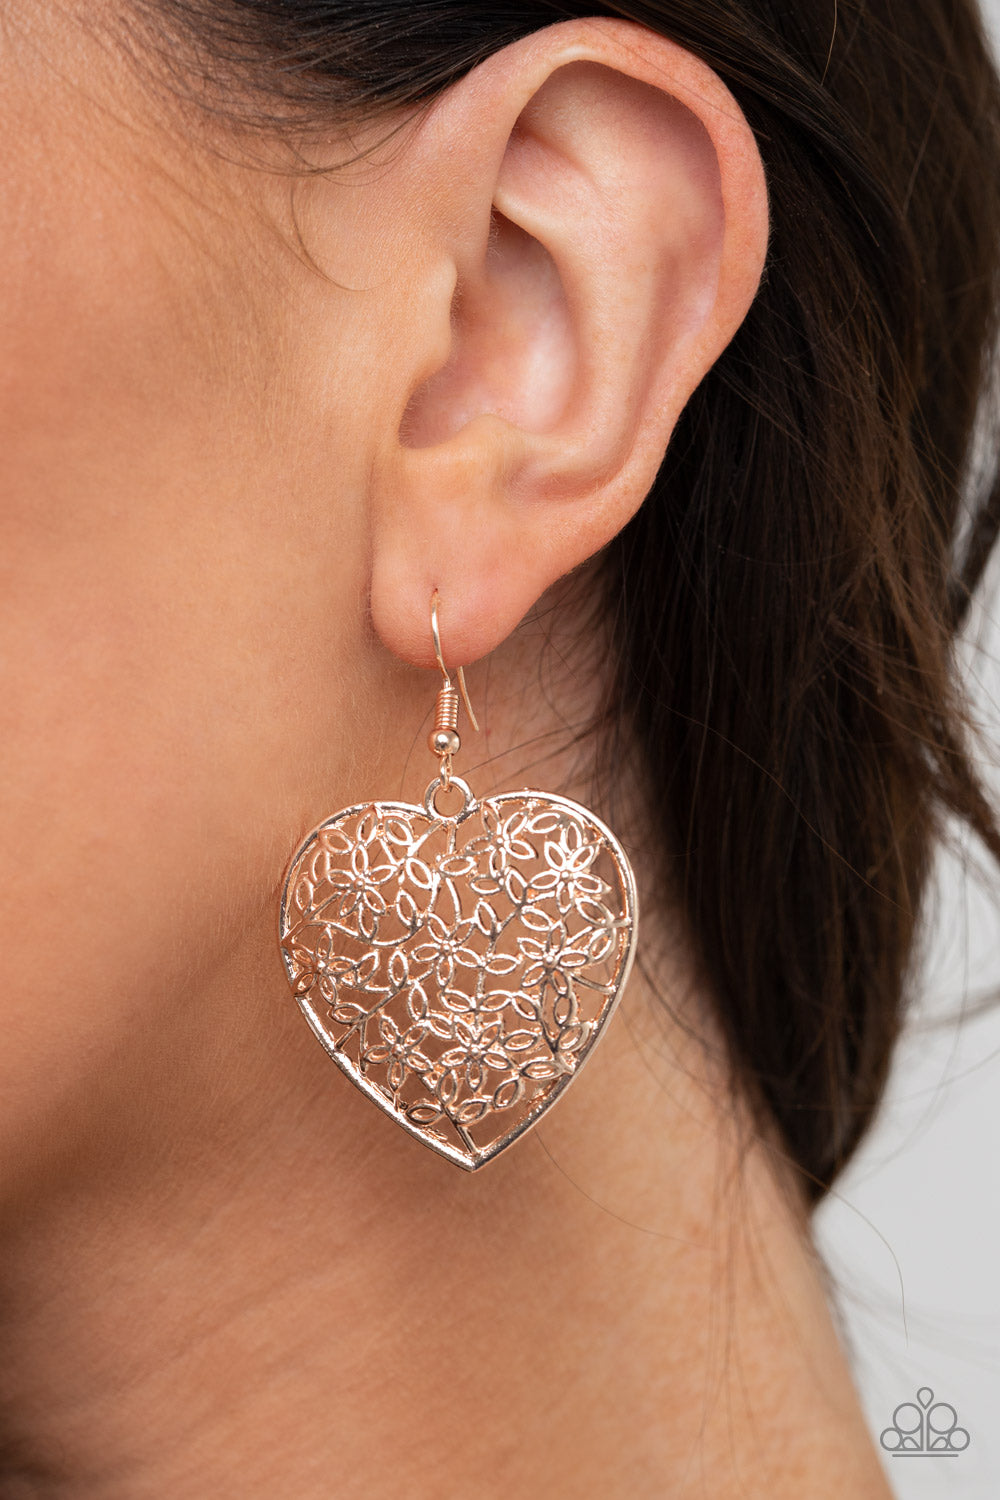 Let your heart grow rose gold - VJ Bedazzled Jewelry